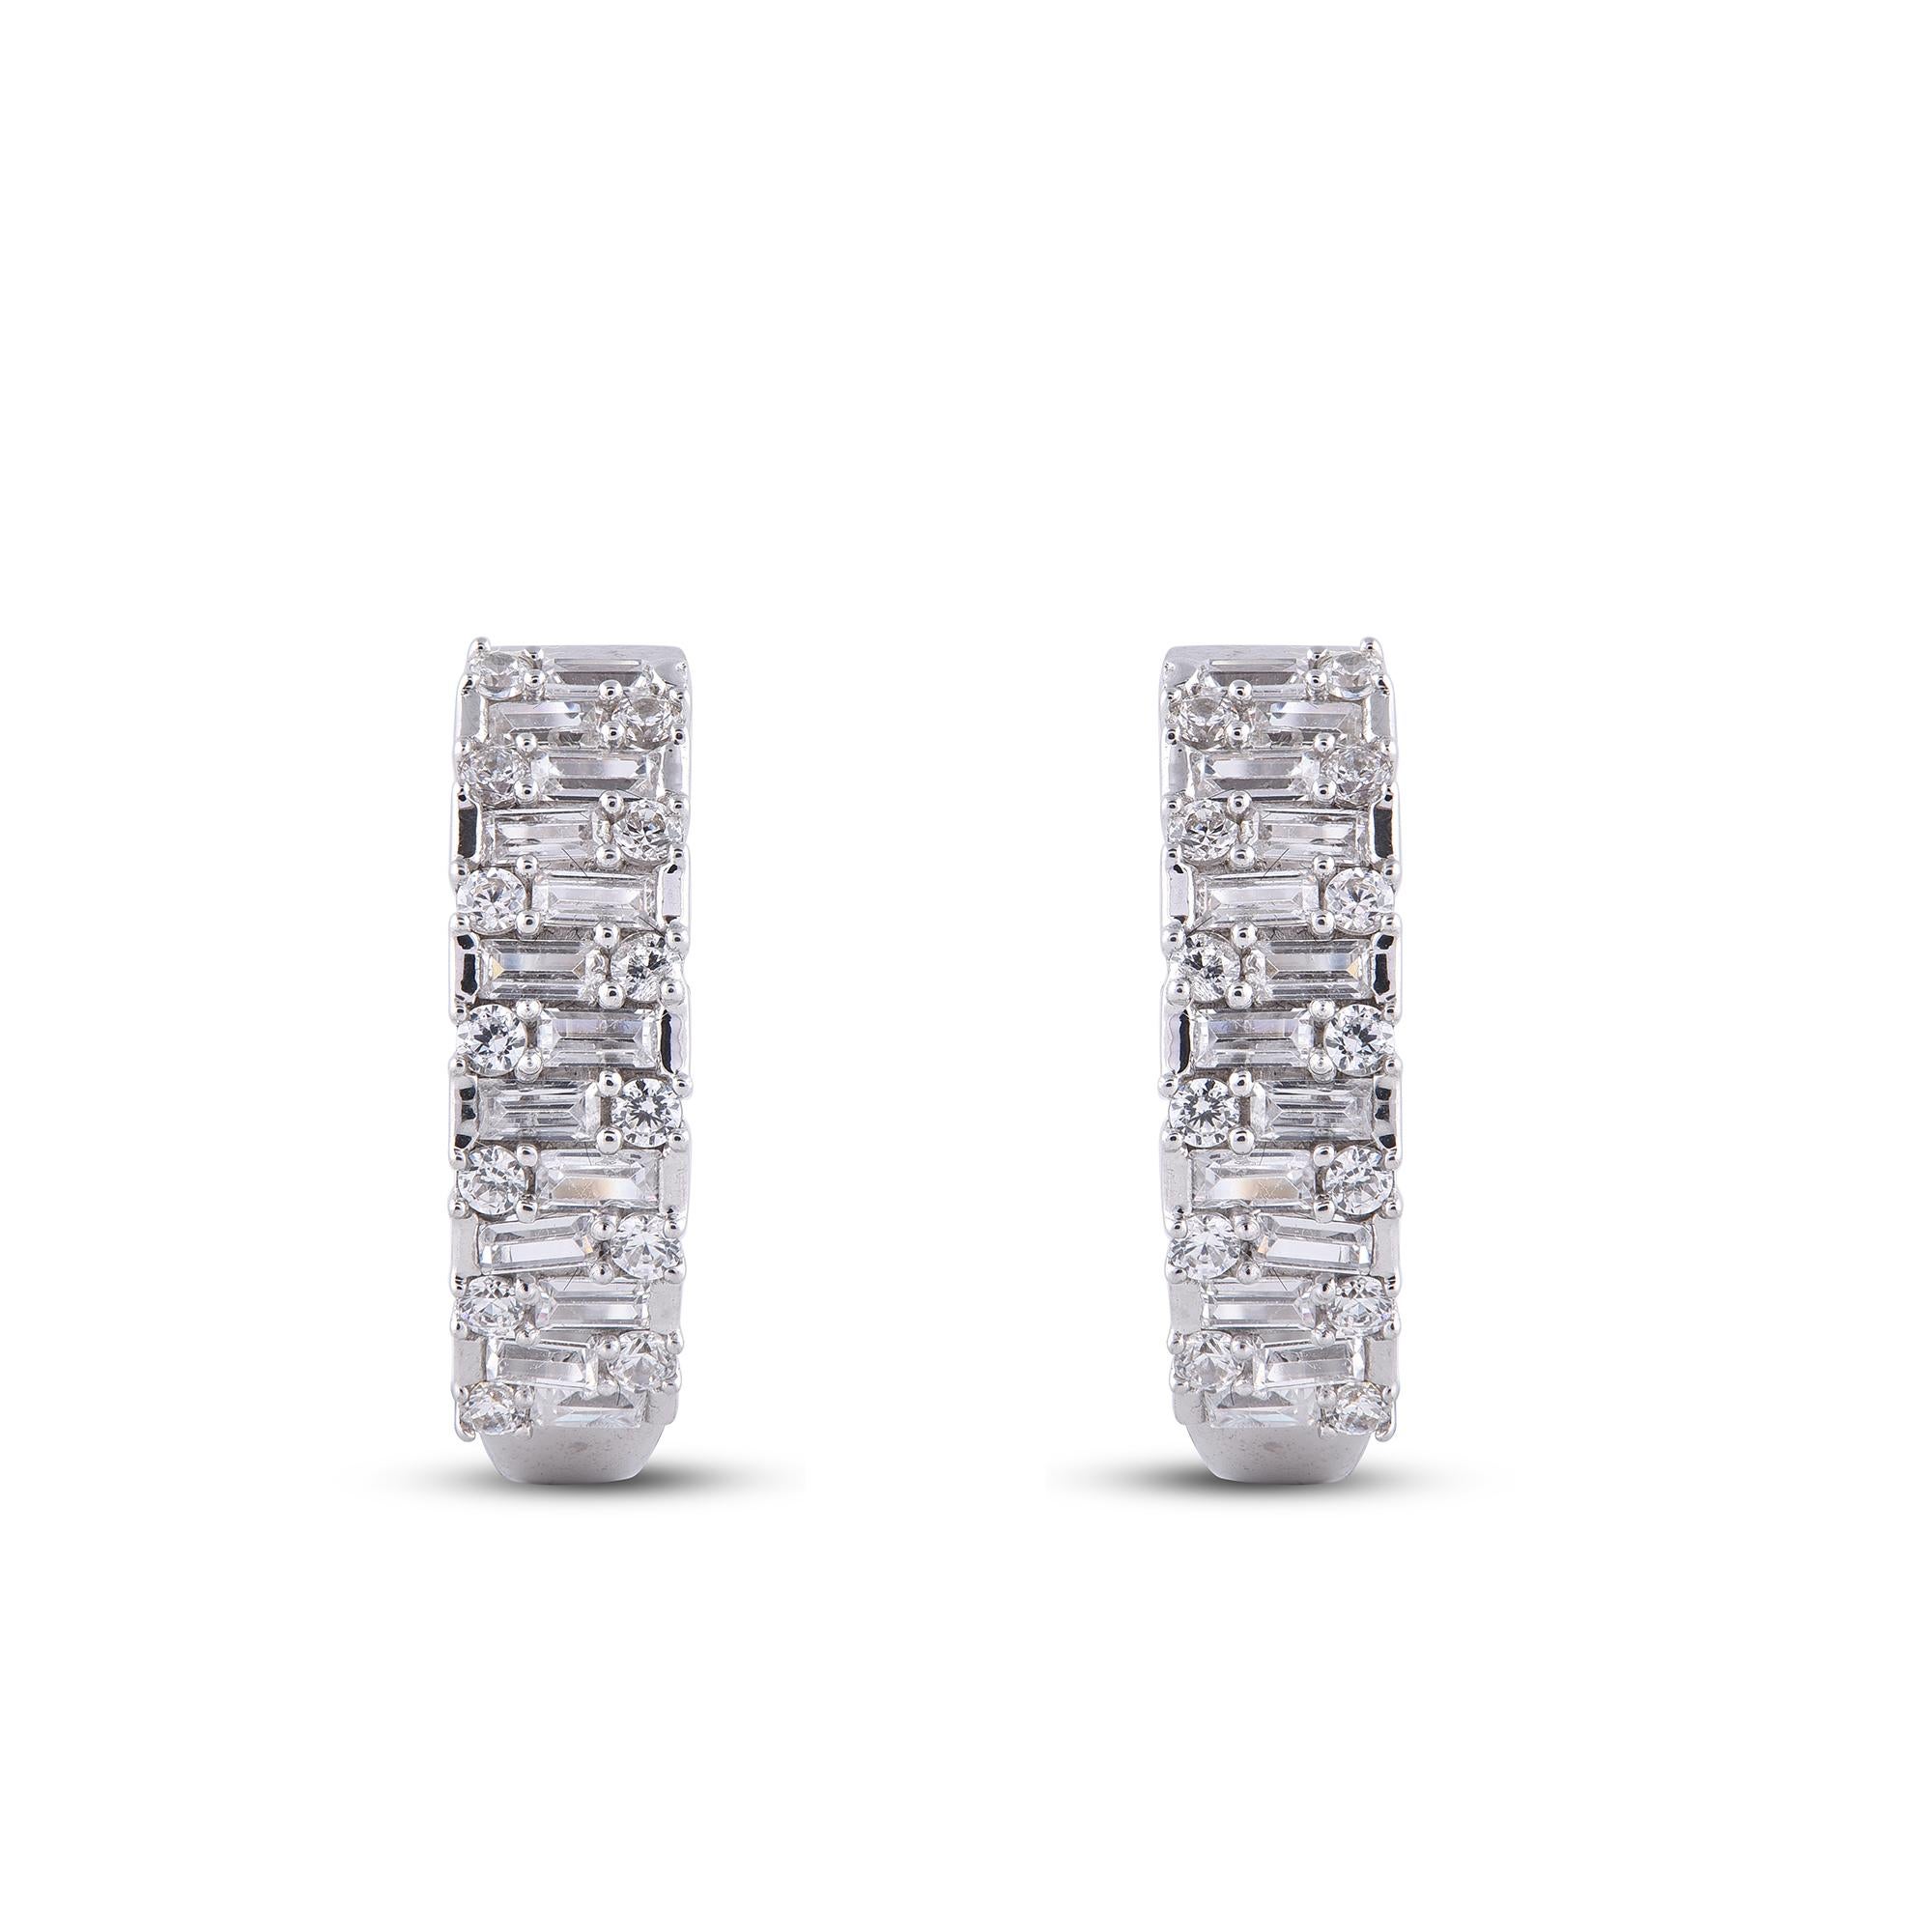 Adorn your formal wear with extra glitz when you put on these hoop earrings. Expertly crafted in 14K white Gold,  earring is cleverly filled with 26 round and 26 baguette-cut diamond set in prong and channel setting and dazzles in H-I color I2